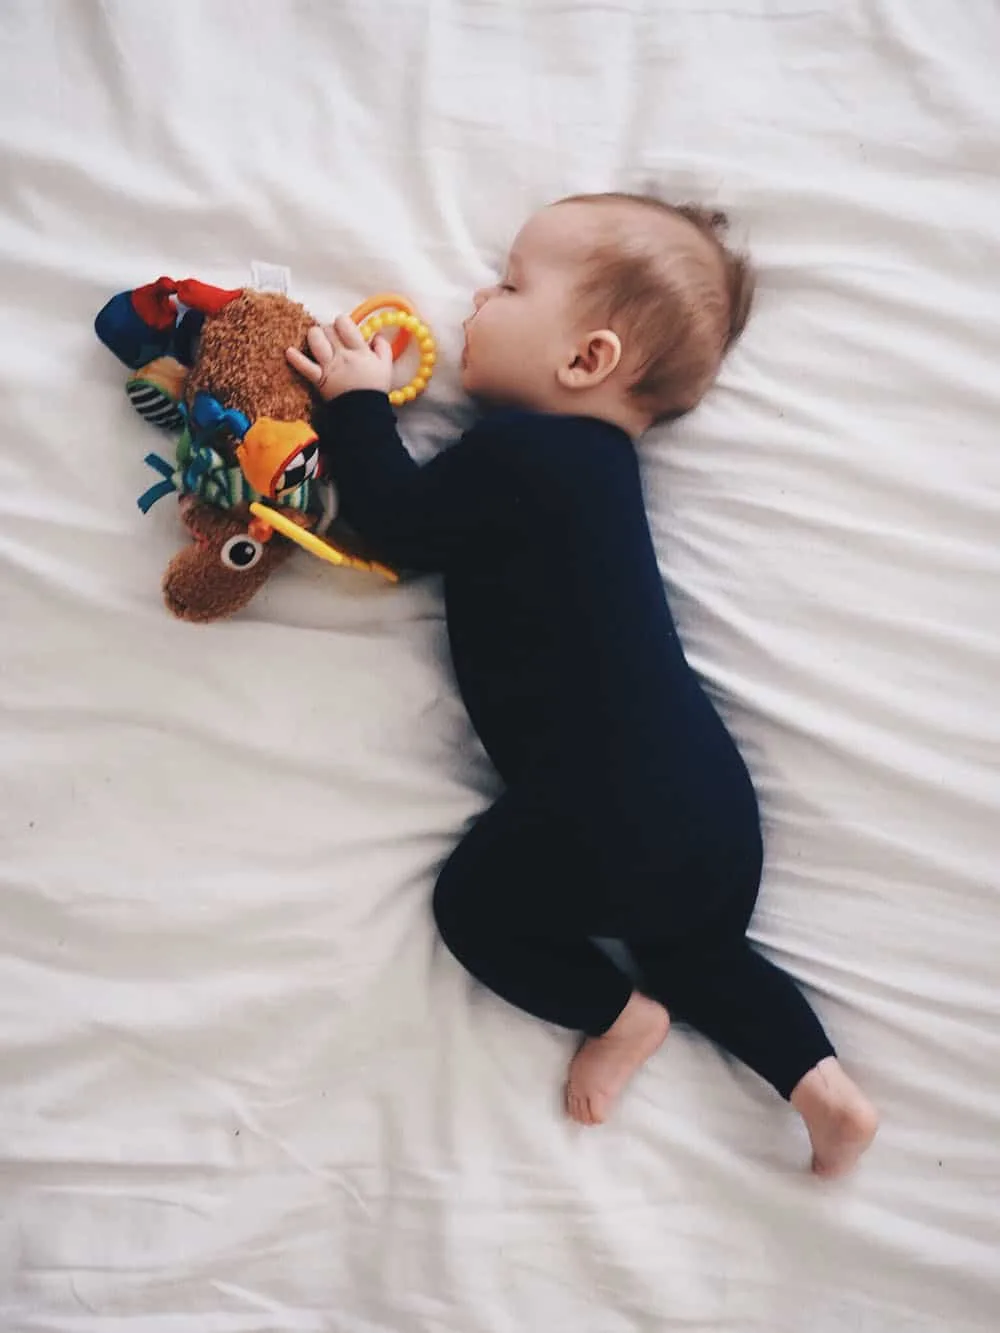 Confused by all the stories about what is and isn't safe for your baby's sleep? Here's the REAL safe sleeping information parents need to know. Exactly what you need to help your baby sleep safely (and to help you keep your sanity as a new mother too!)